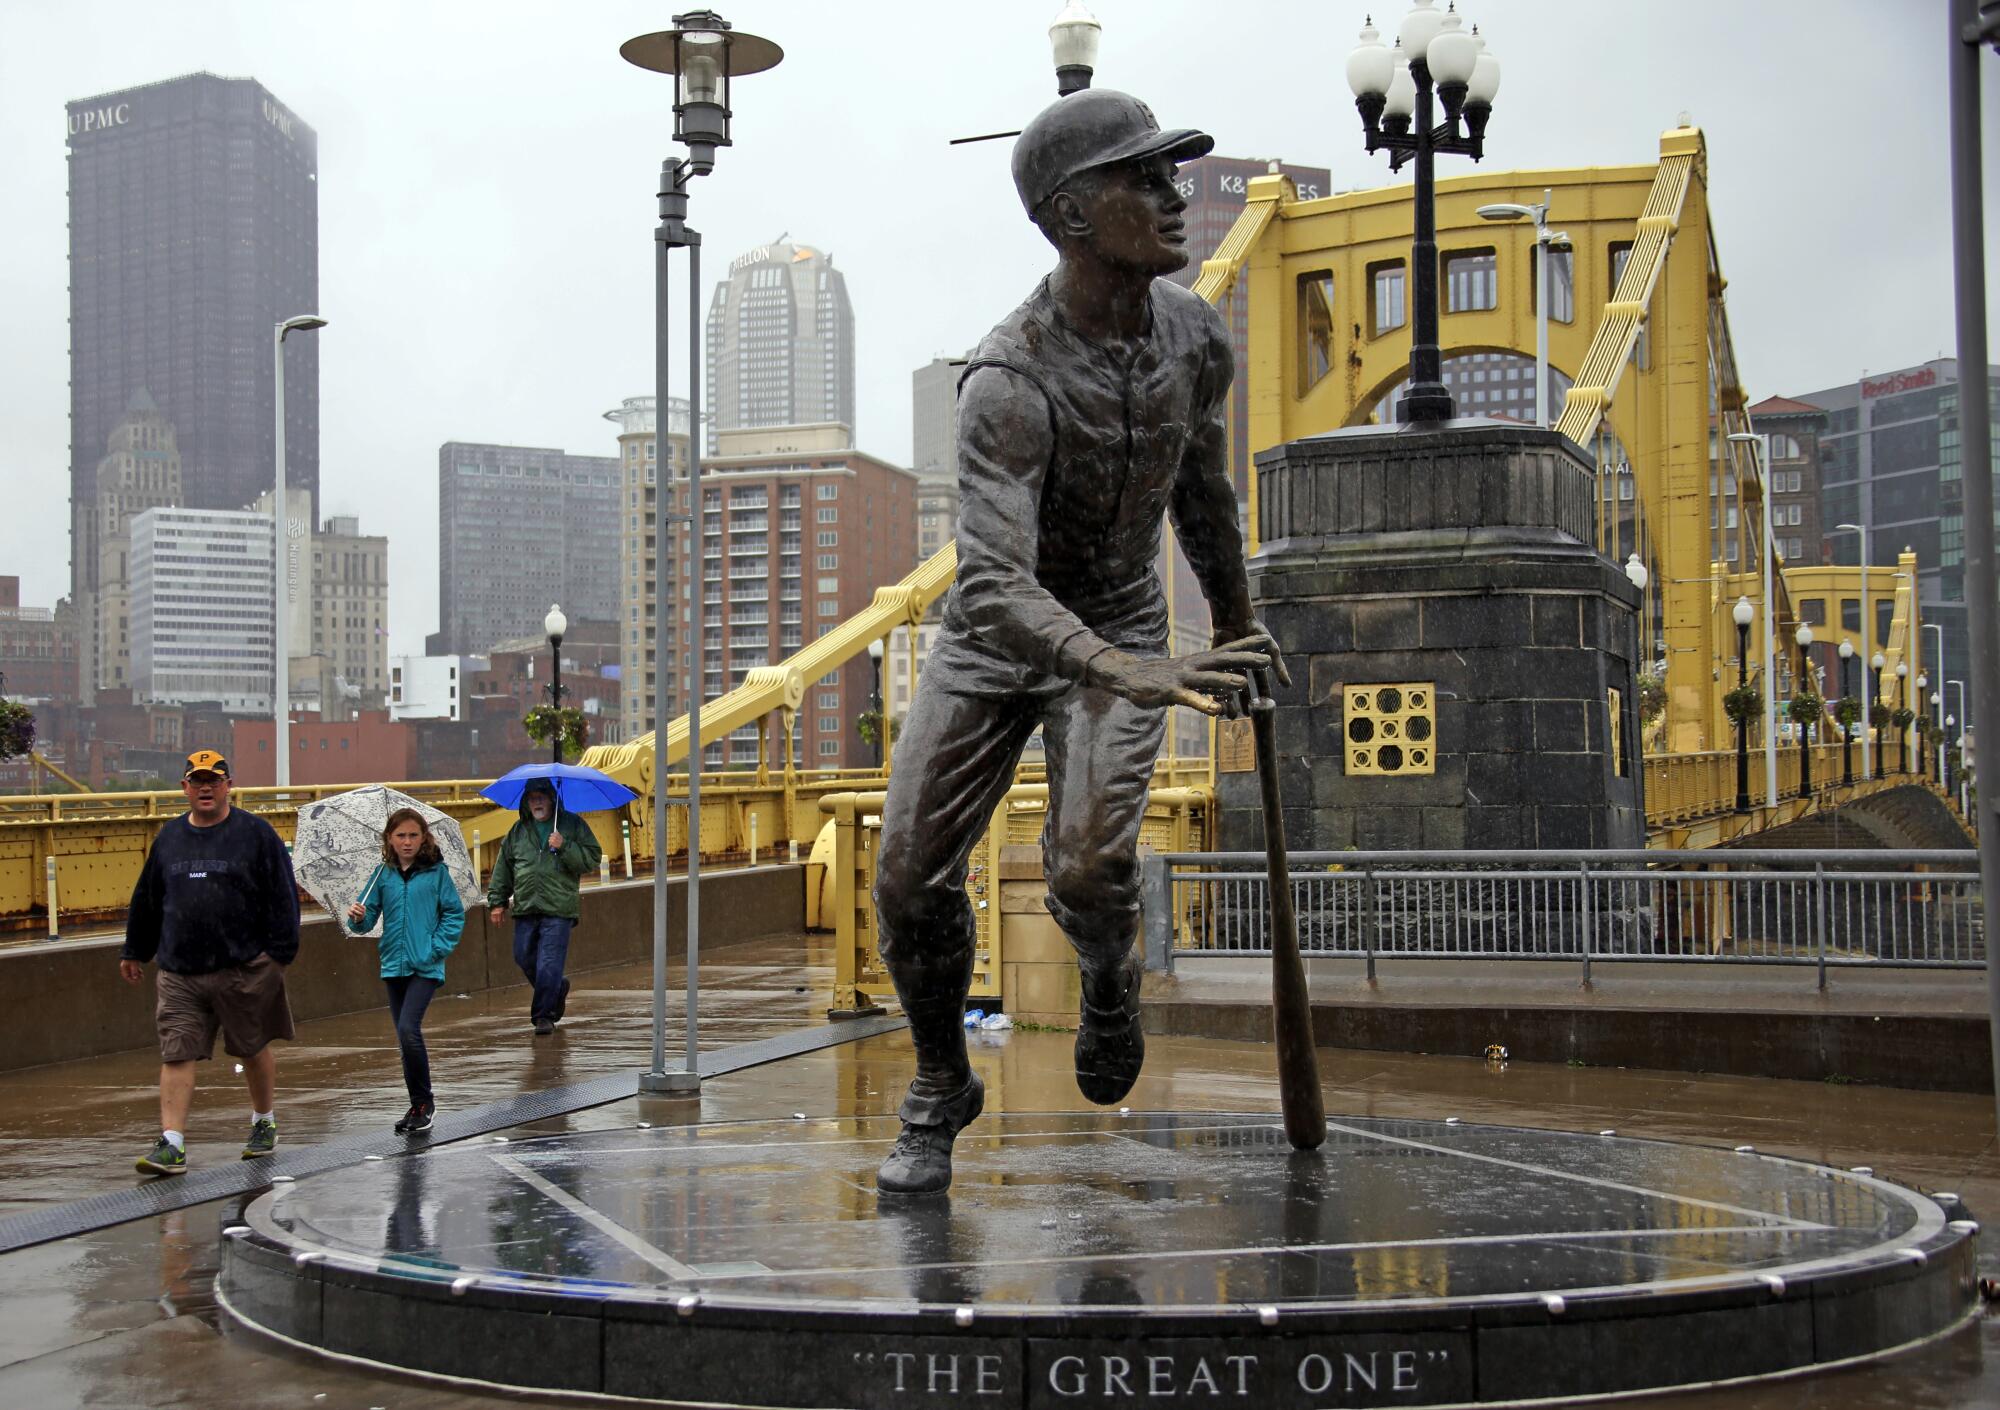 Roberto Clemente: “Any time you have the” on Changemakrs.com